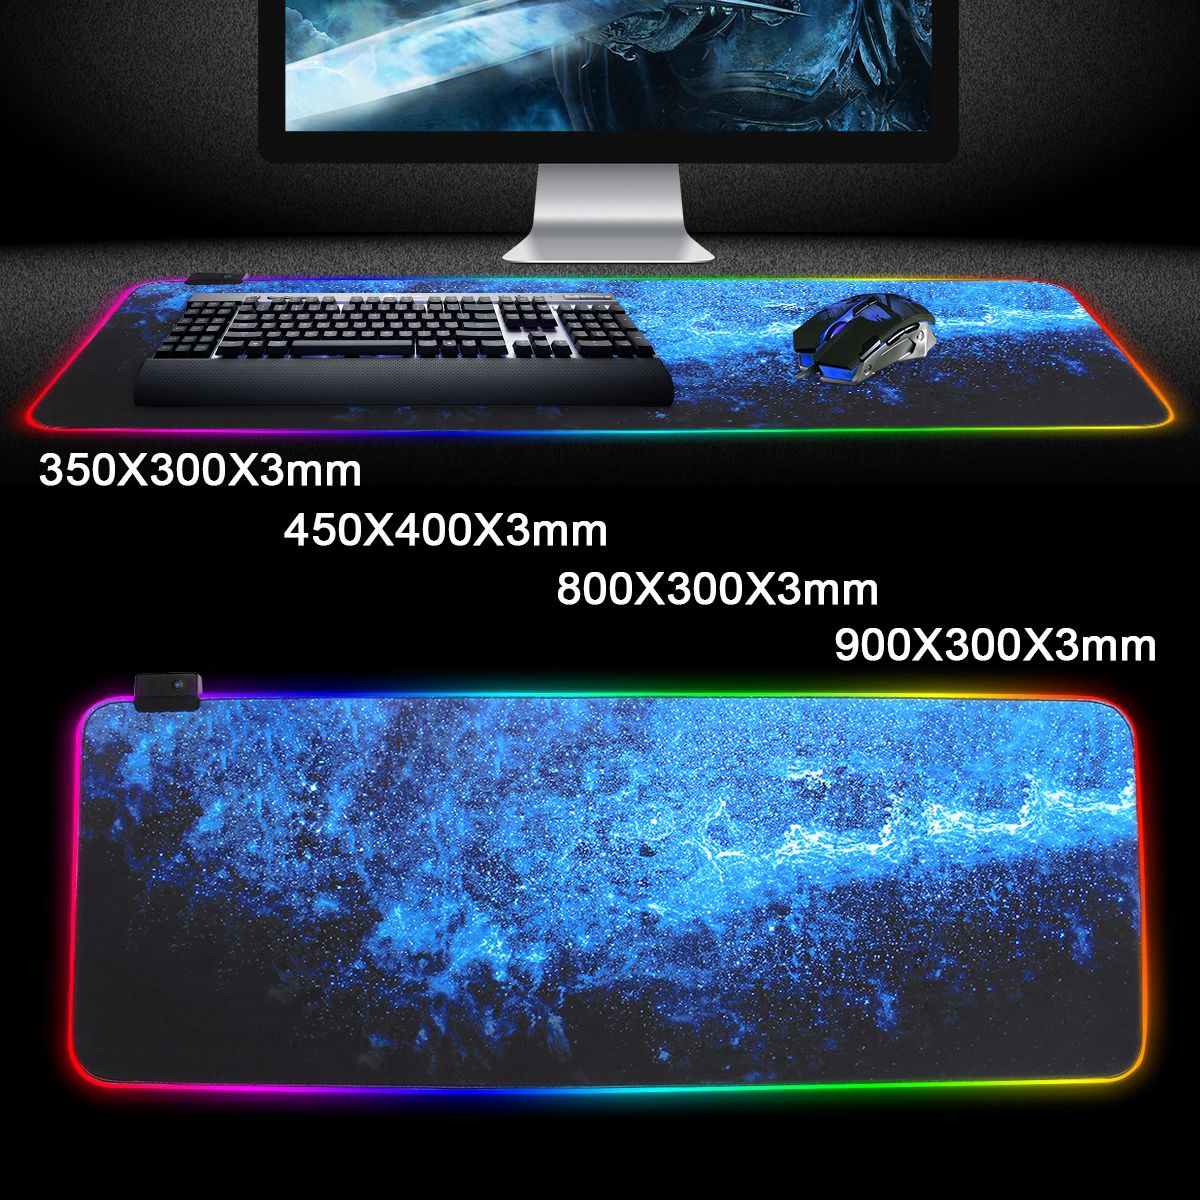 The-Milky-Way-USB-Wired-6-RGB-Colorful--7-Monochrome-Lights-LED-Mouse-Pad-for-Gaming-Mouse-E-Sport-1589639